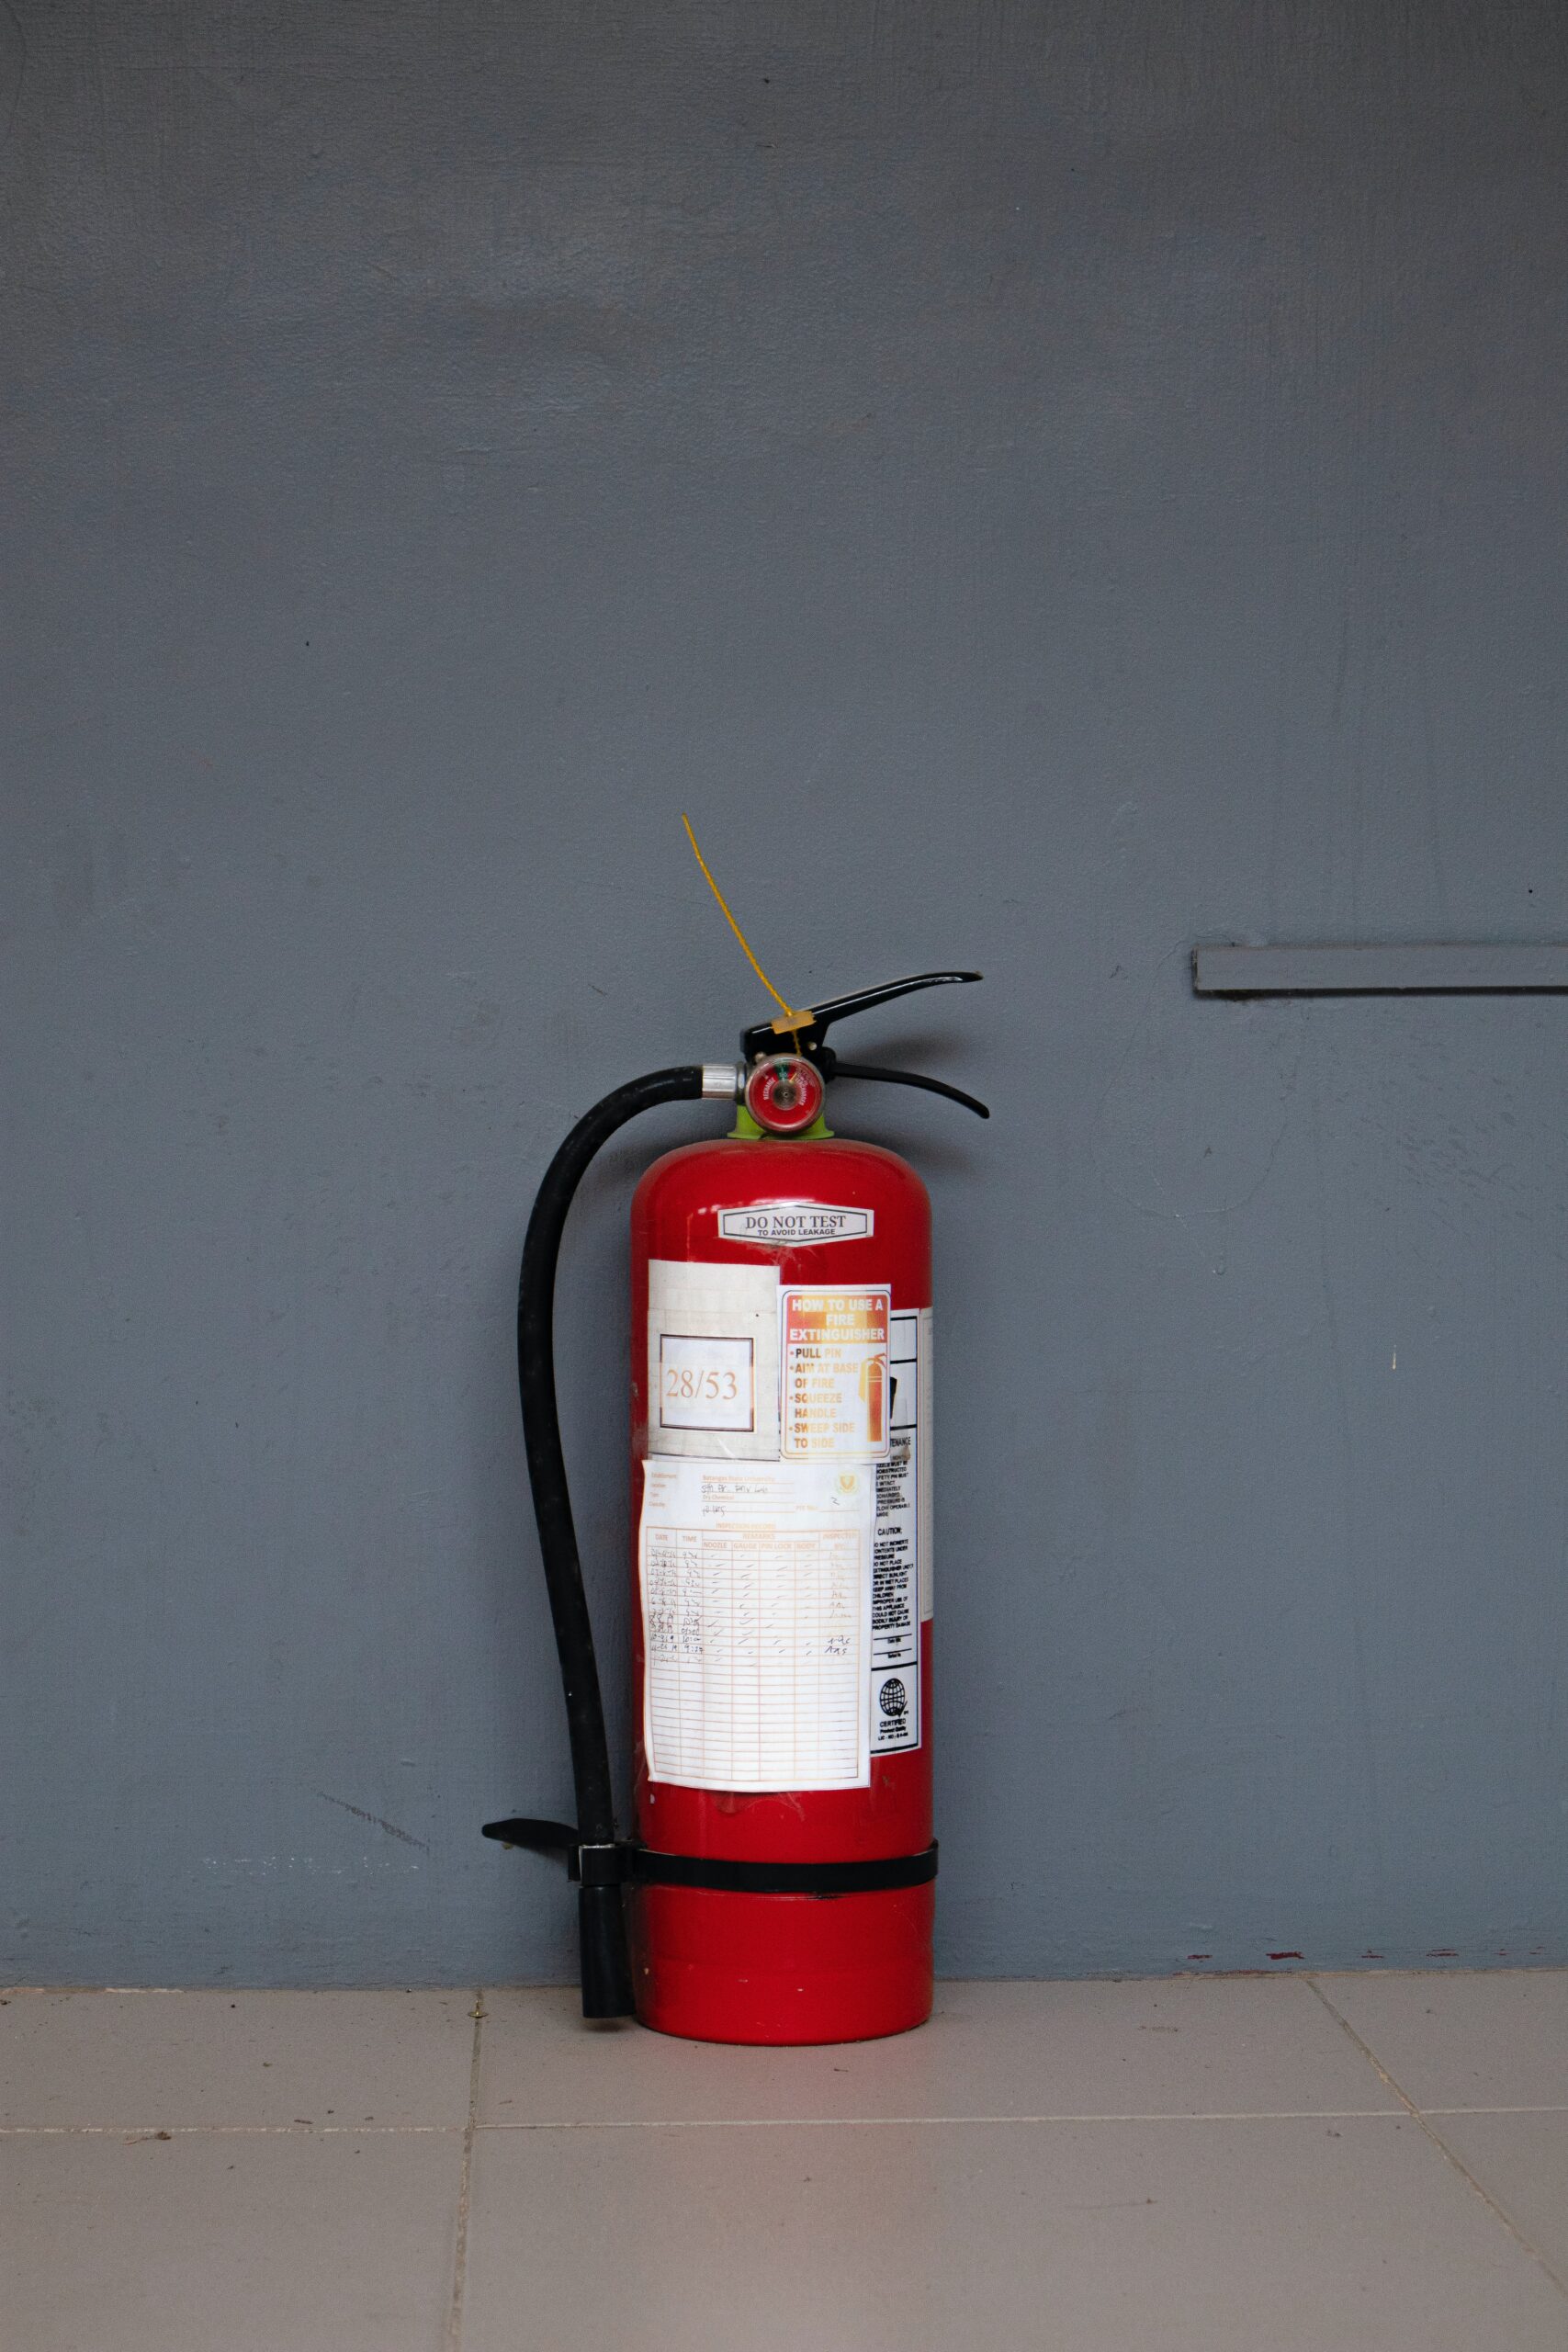 Fire Alarm – when was yours last checked?